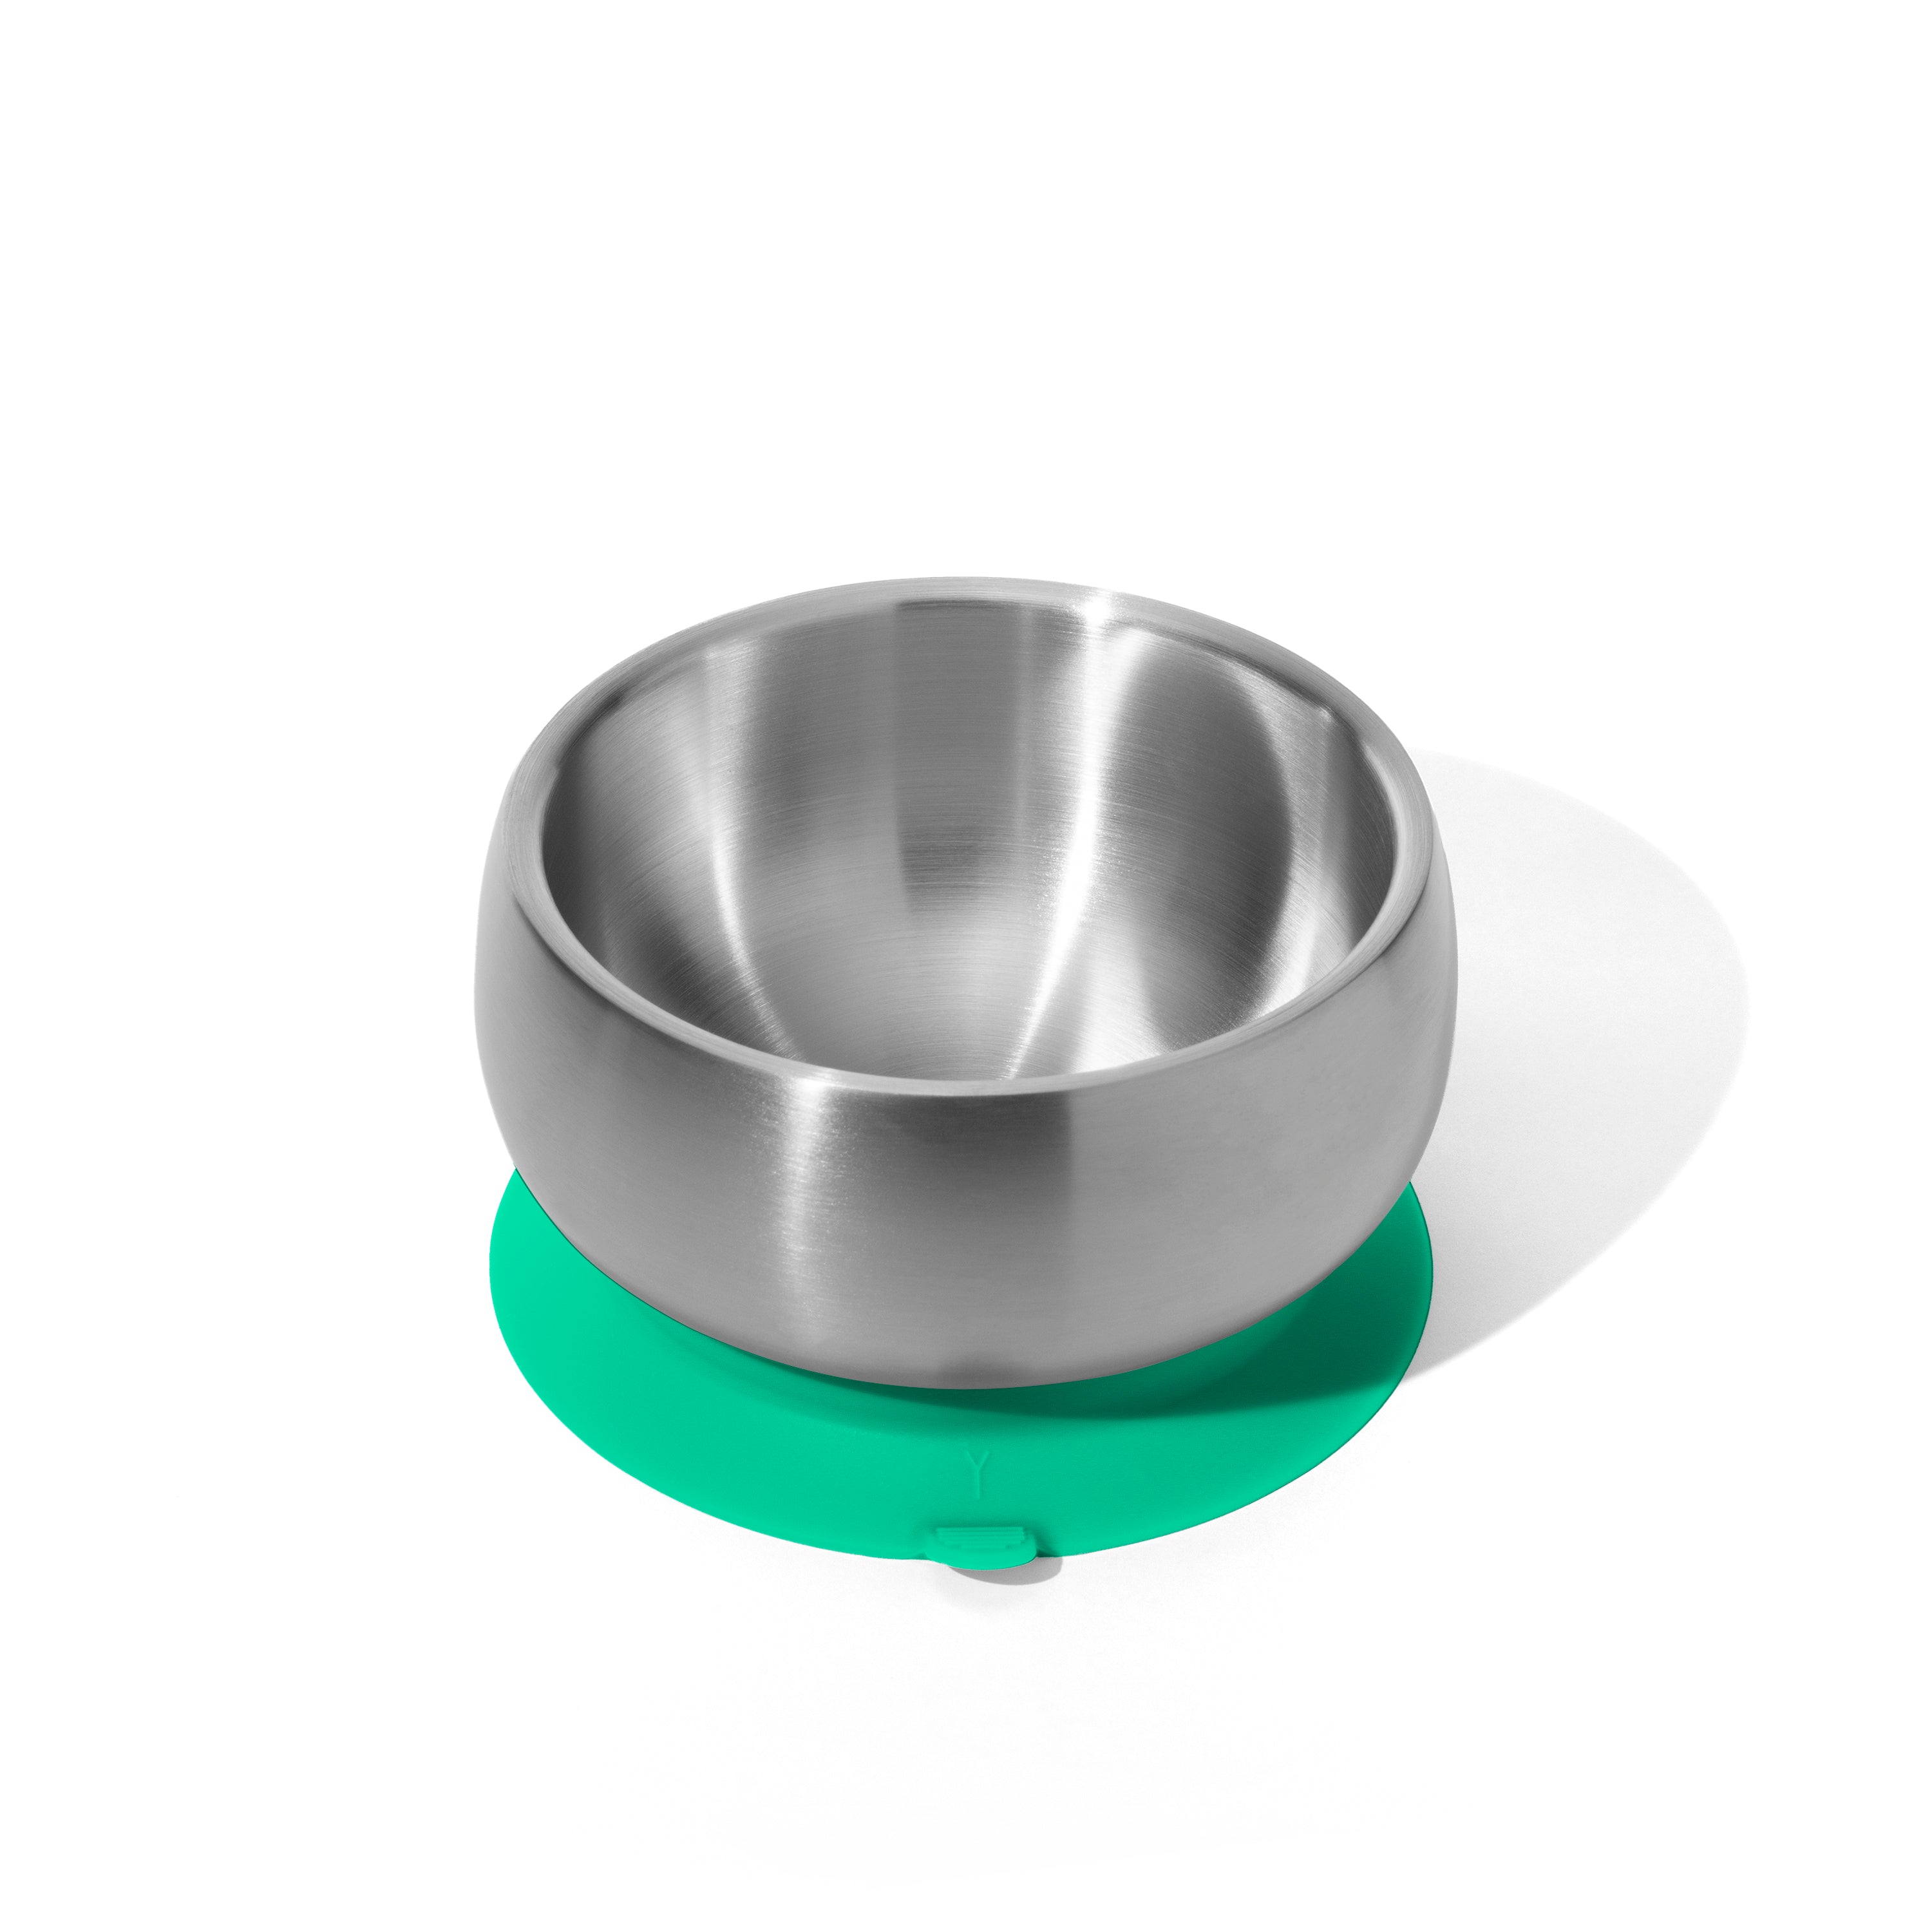 Avanchy Stainless Steel Baby Bowl With Lid - Green